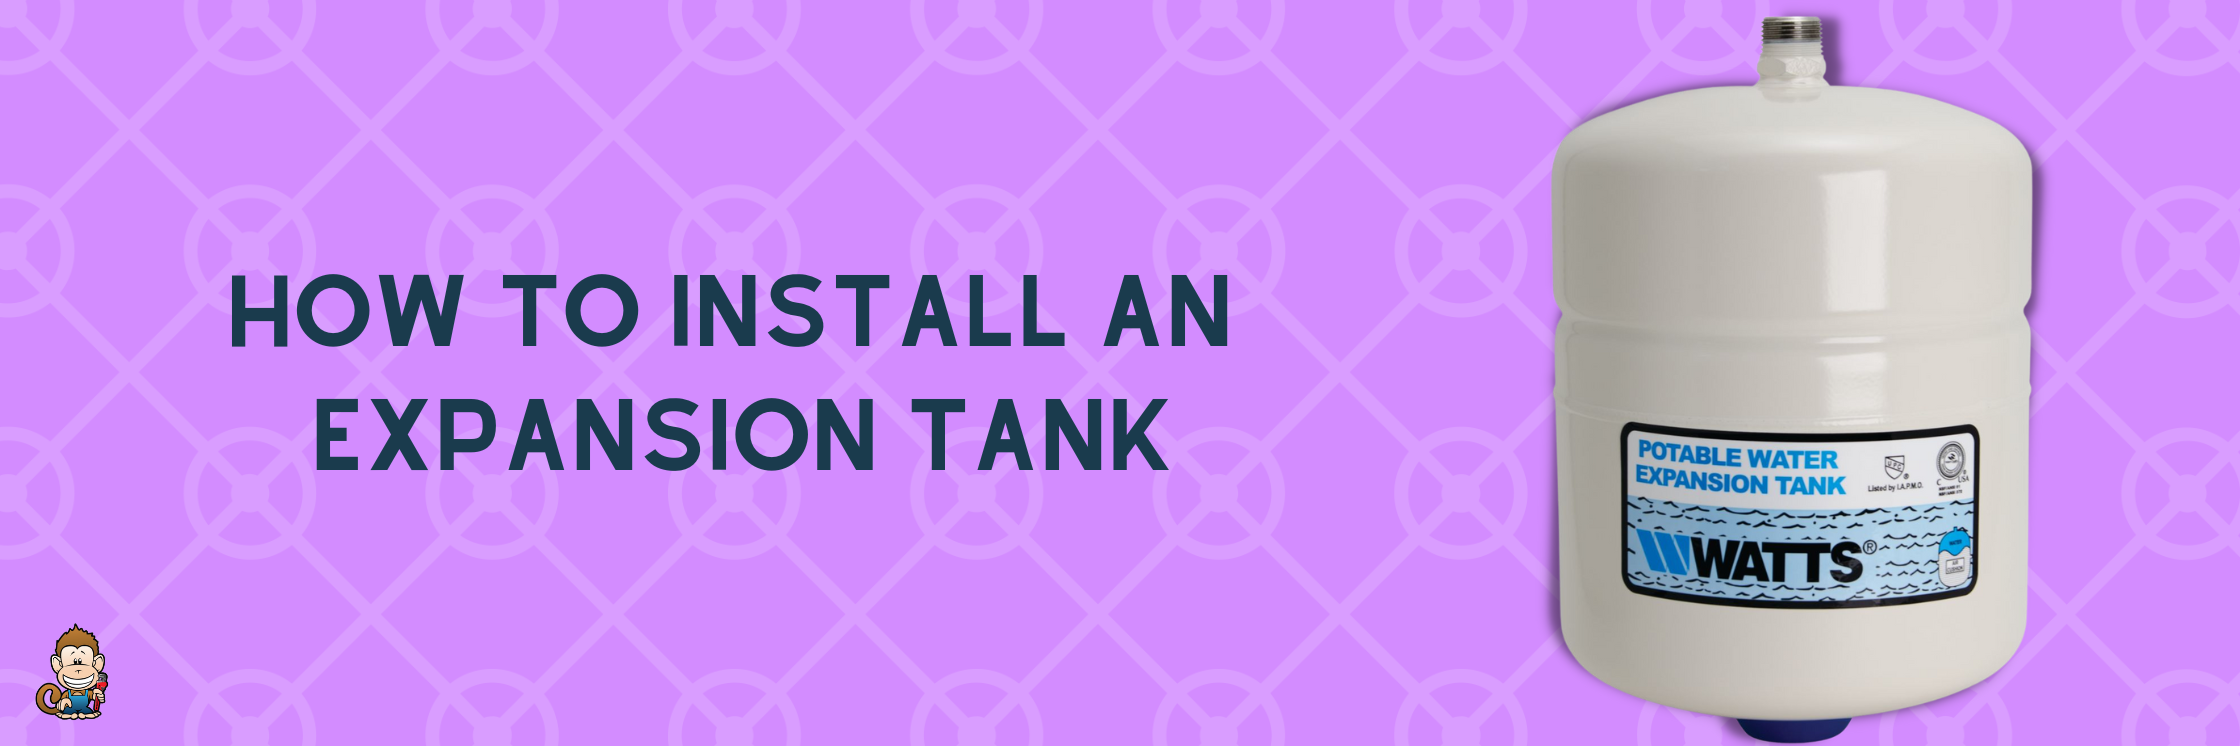 How to Install an Expansion Tank